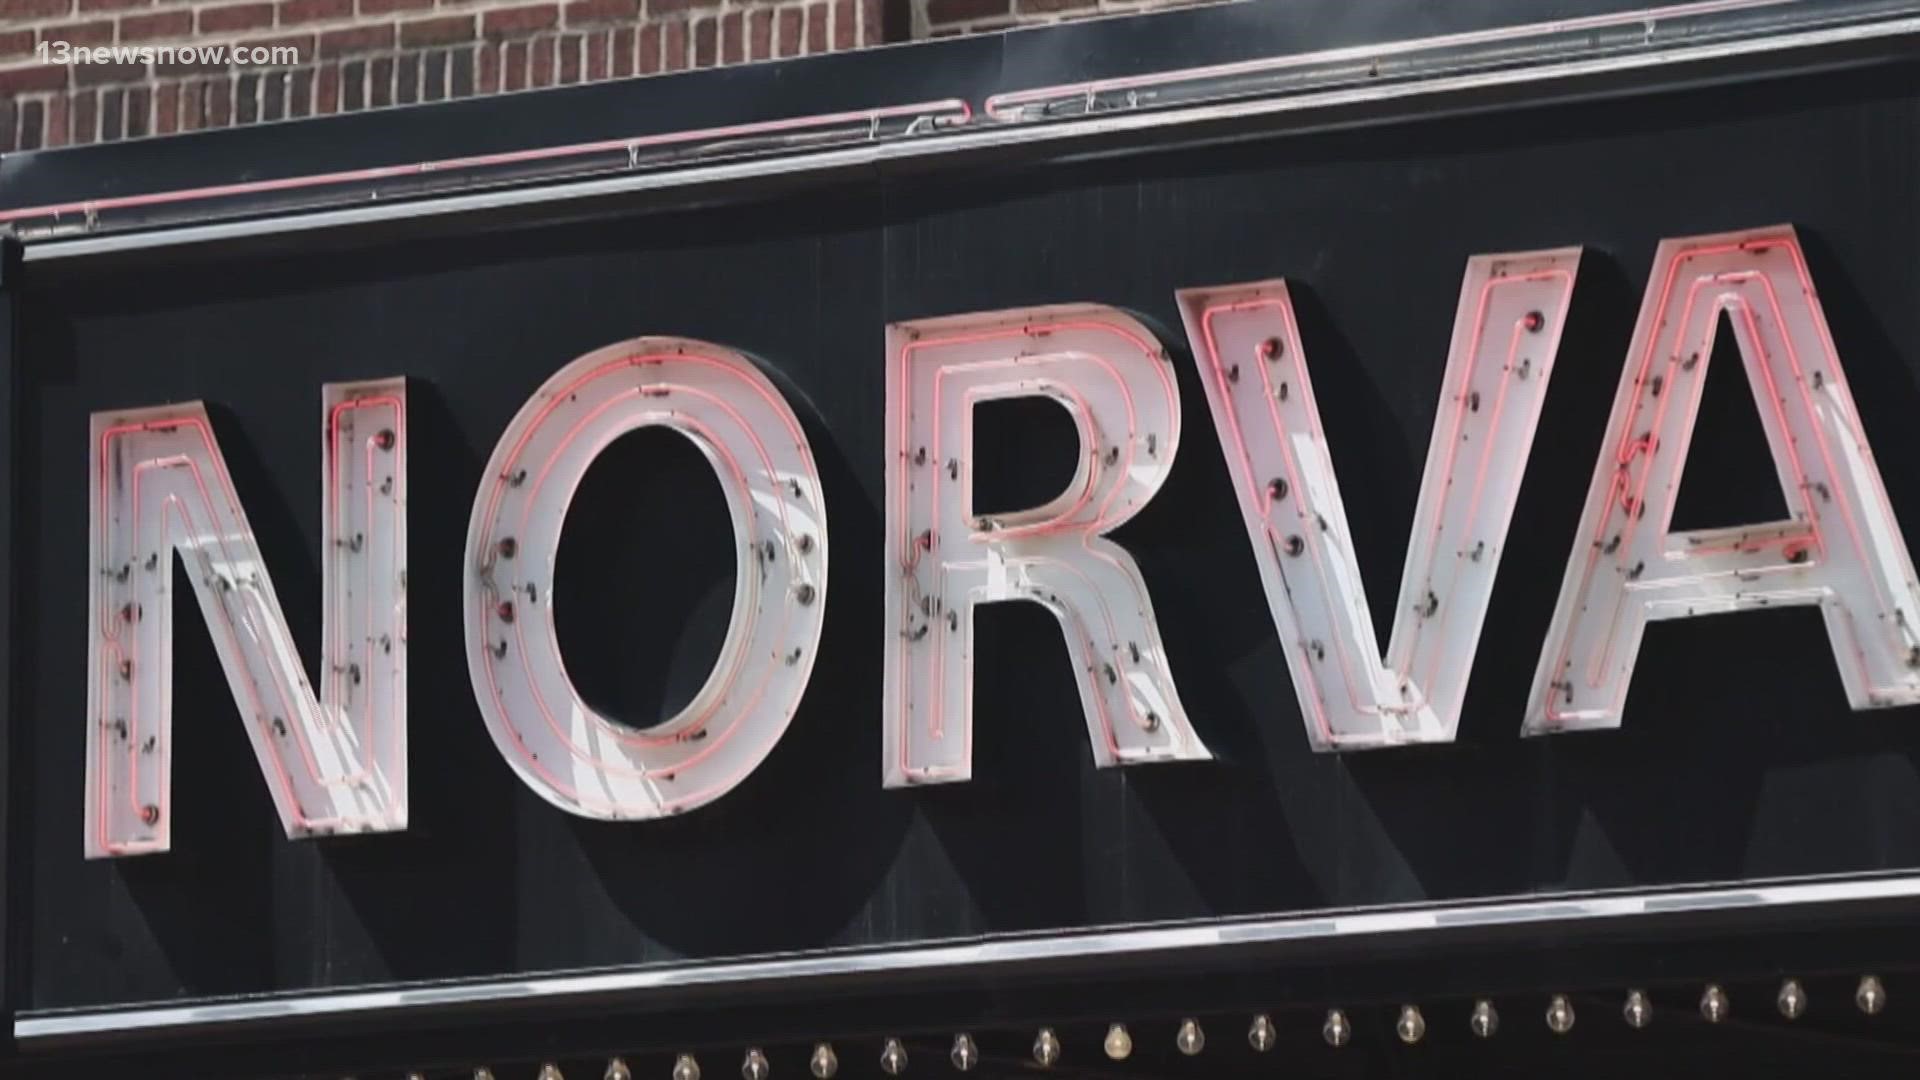 The Norva will soon require concertgoers and event staff to prove they're vaccinated.